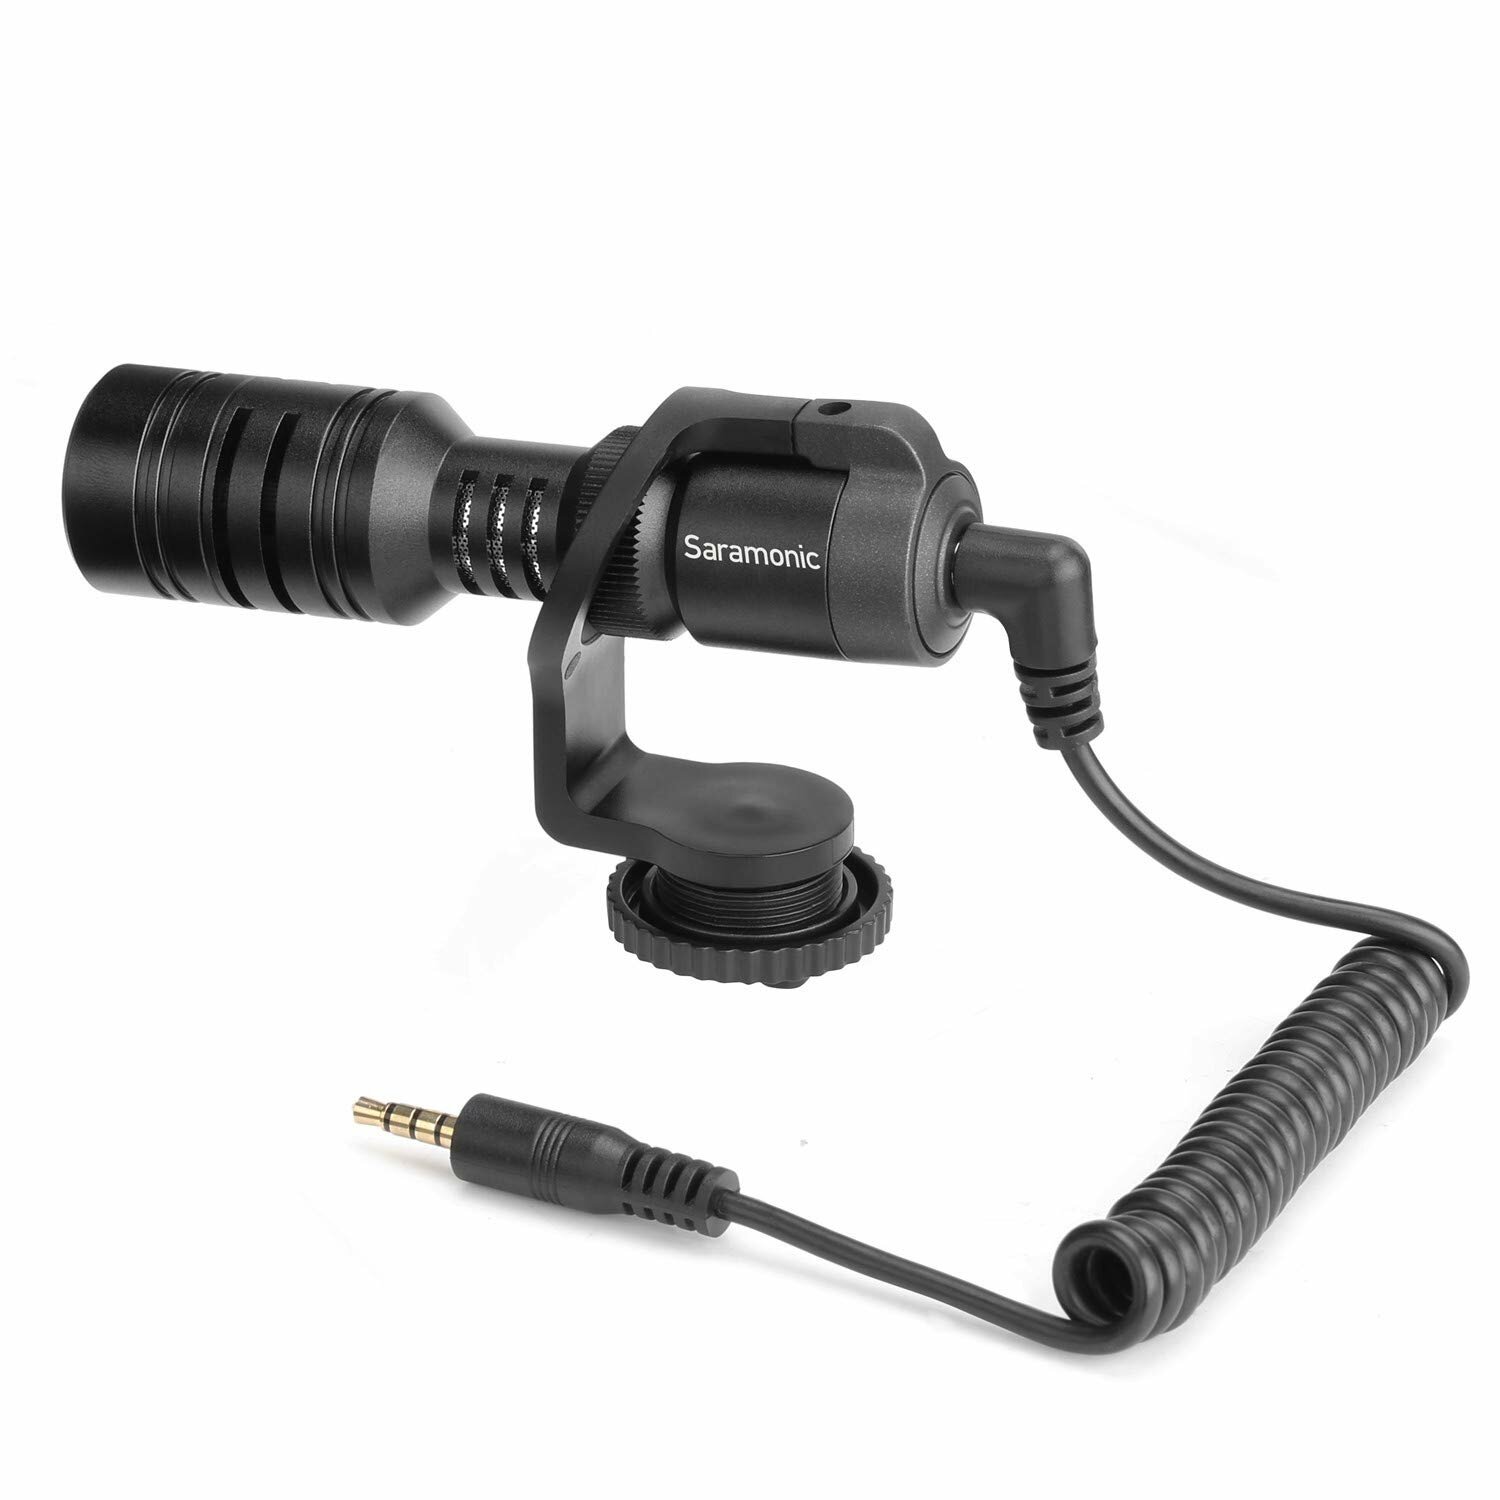 Saramonic Vmic Mini Mountable Condenser Microphone For DSLR Mirrorless & Video Cameras Or Smartphones & Tablets